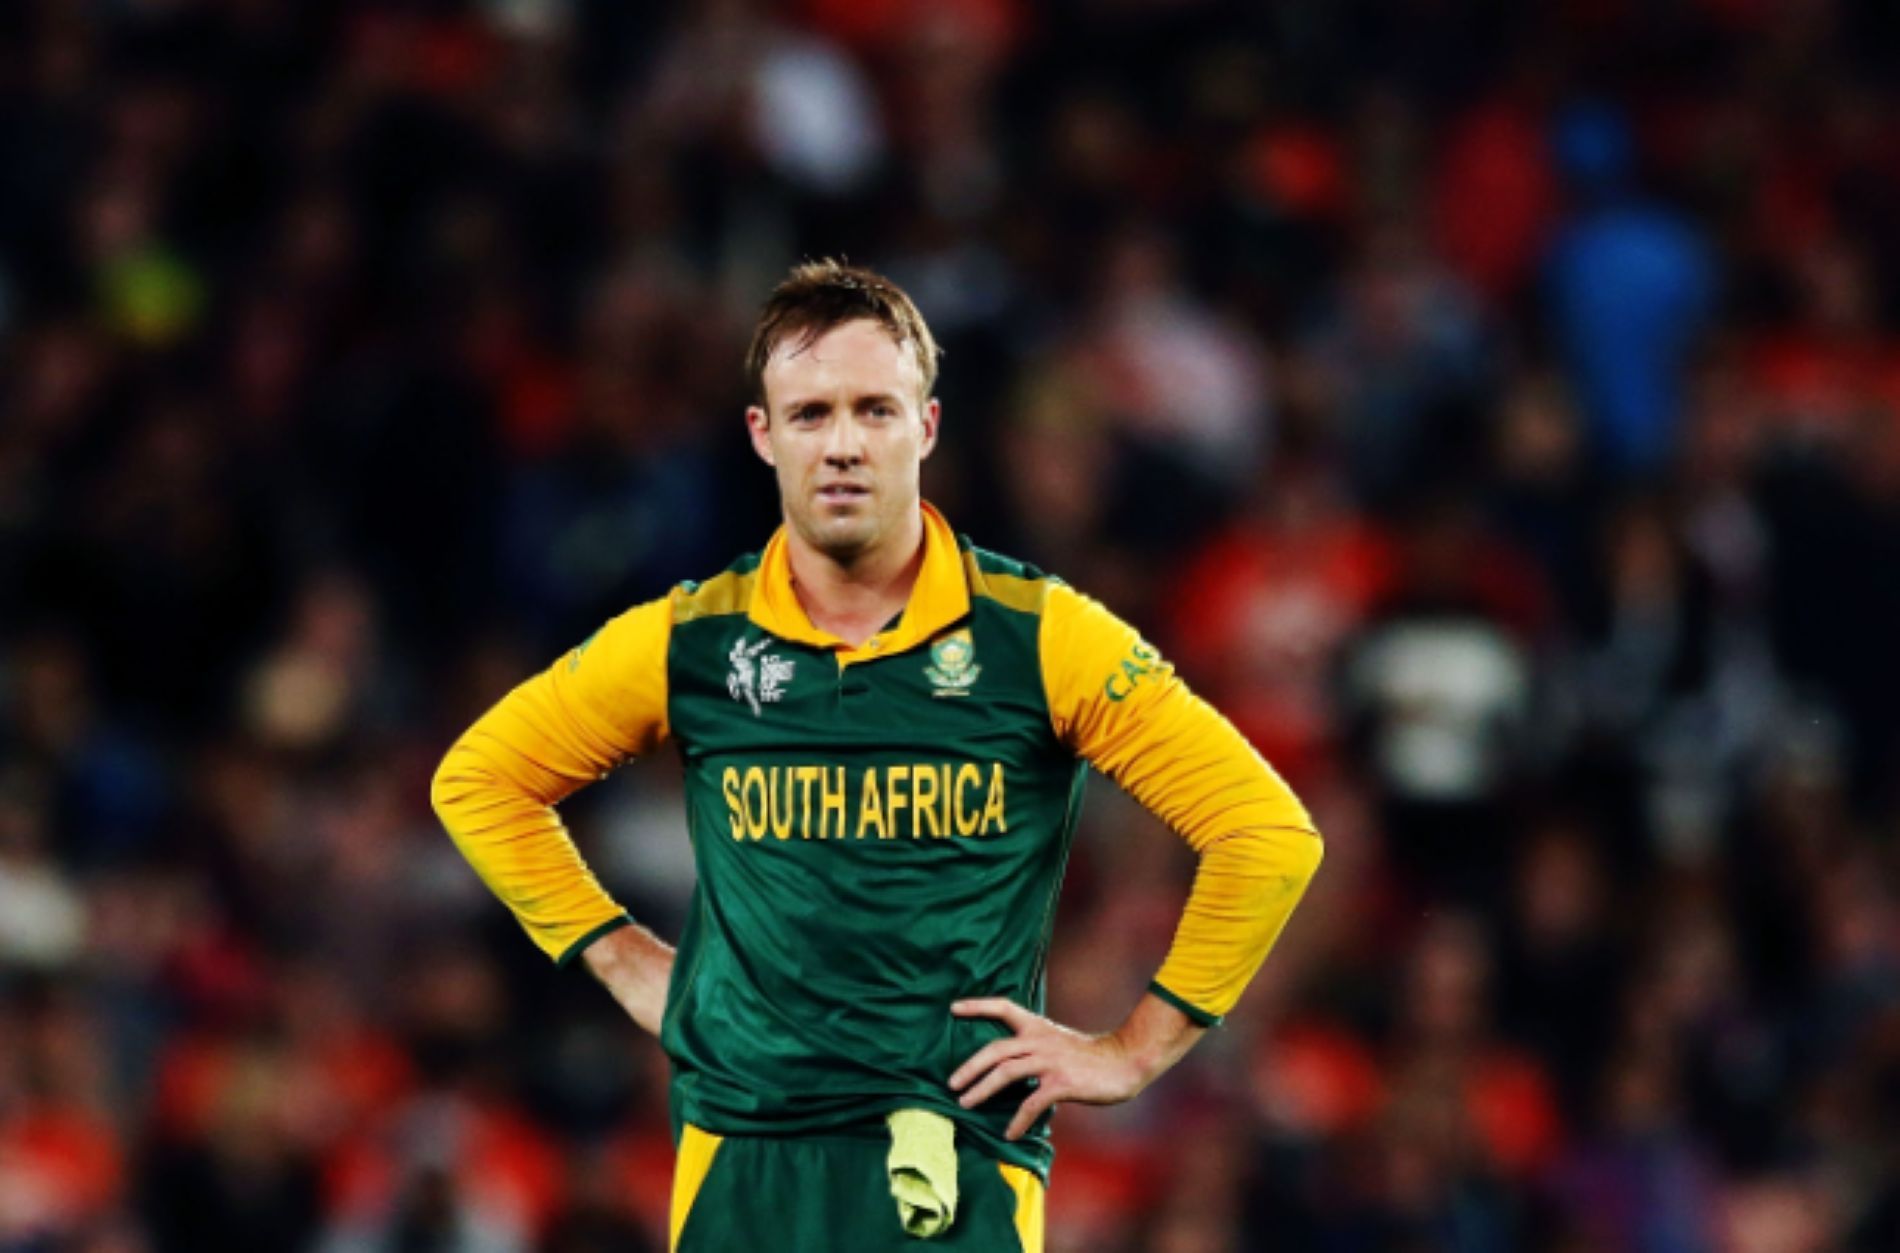 AB de Villiers could not hide his tears after the 2015 World Cup semi-final.